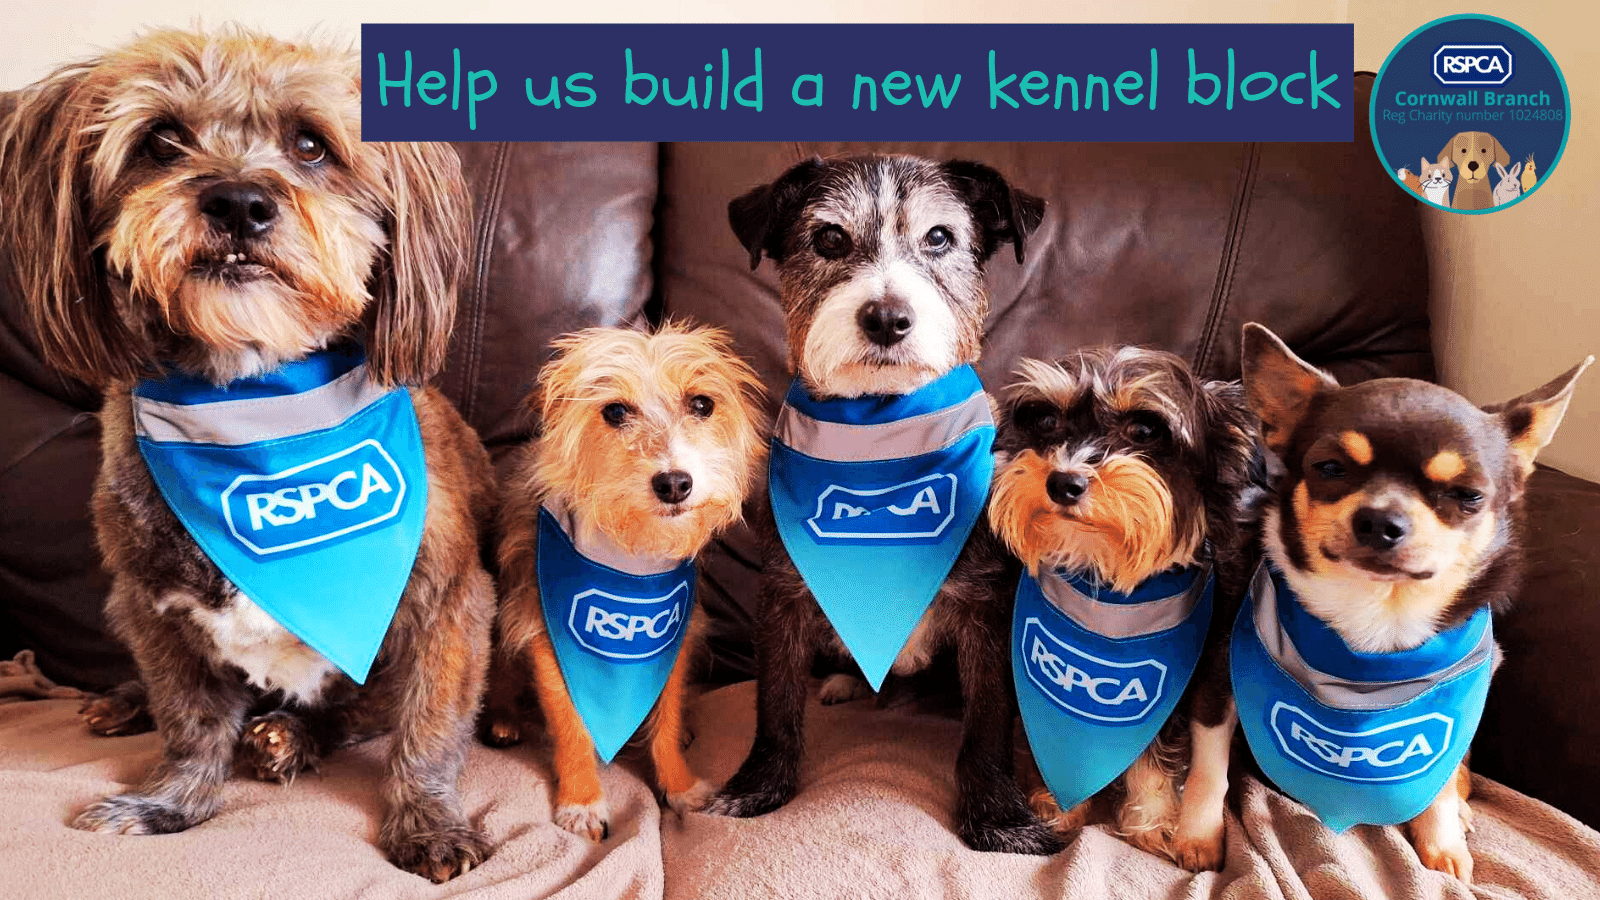 Help us build a new kennel block